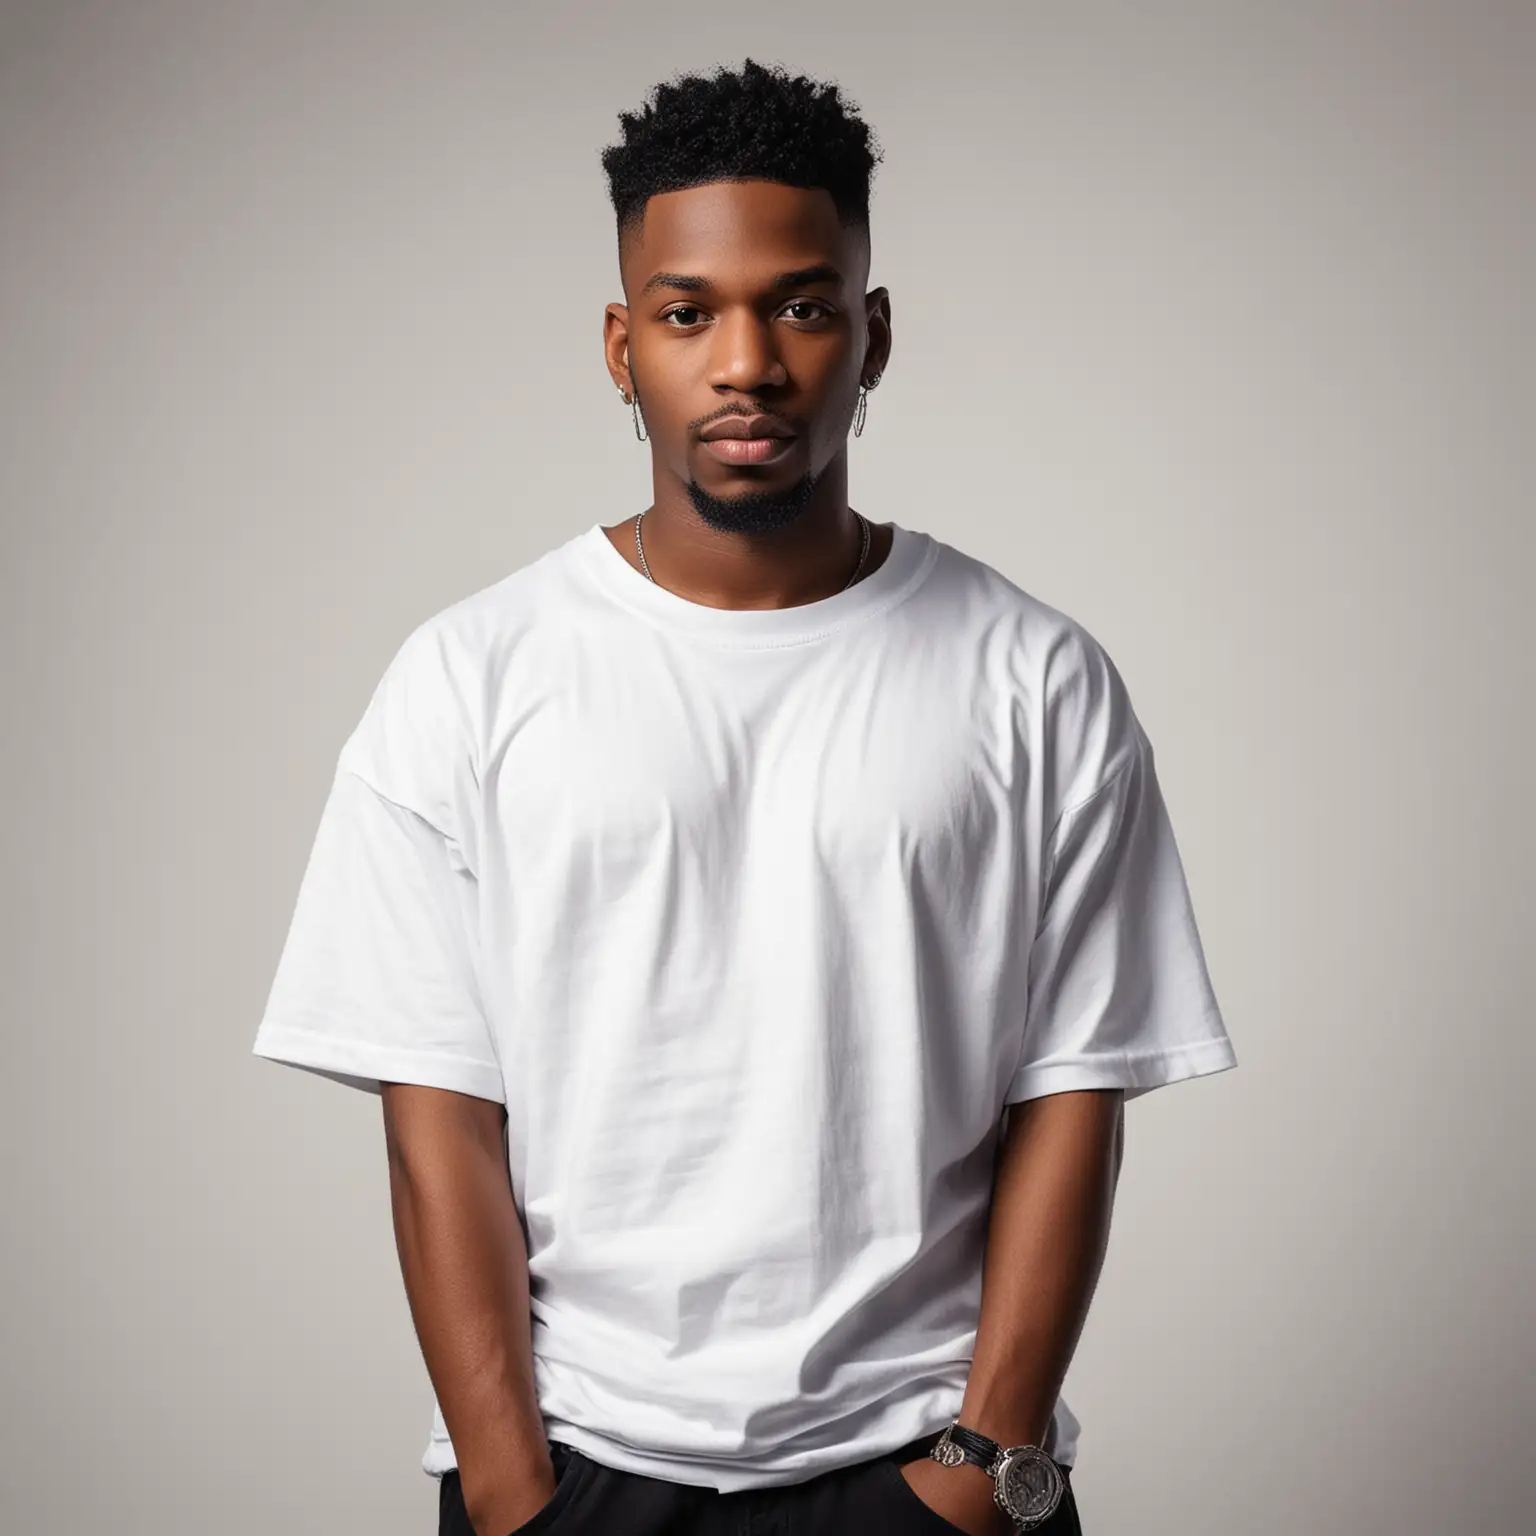 a black gentle man with white t shirt, hip hop theme background